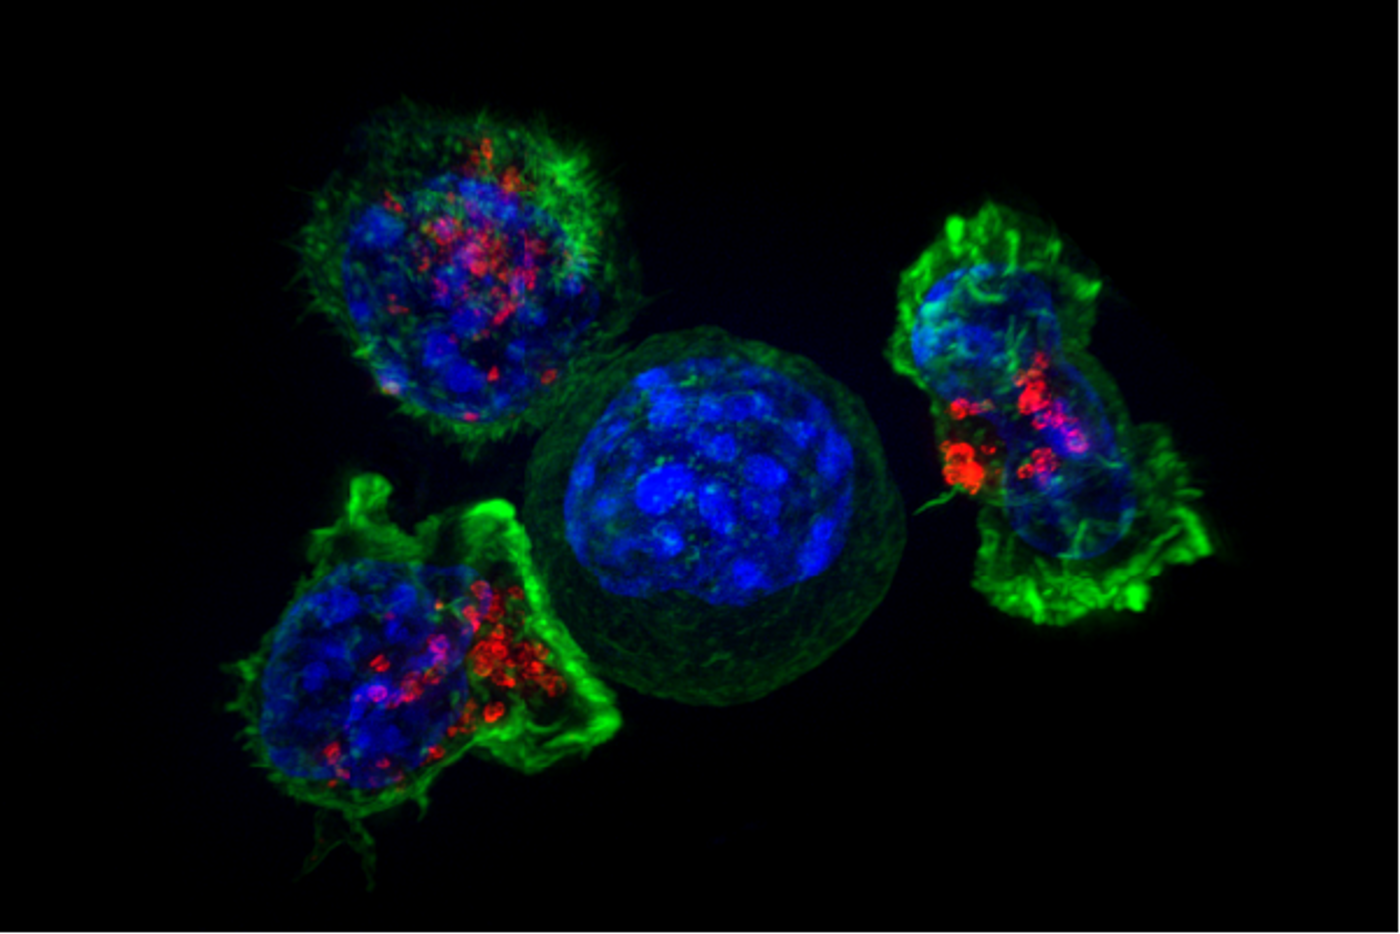 A group of Cytotoxic T cells (green and red) surrounds a cancer cell (blue, center). Credit: NIH